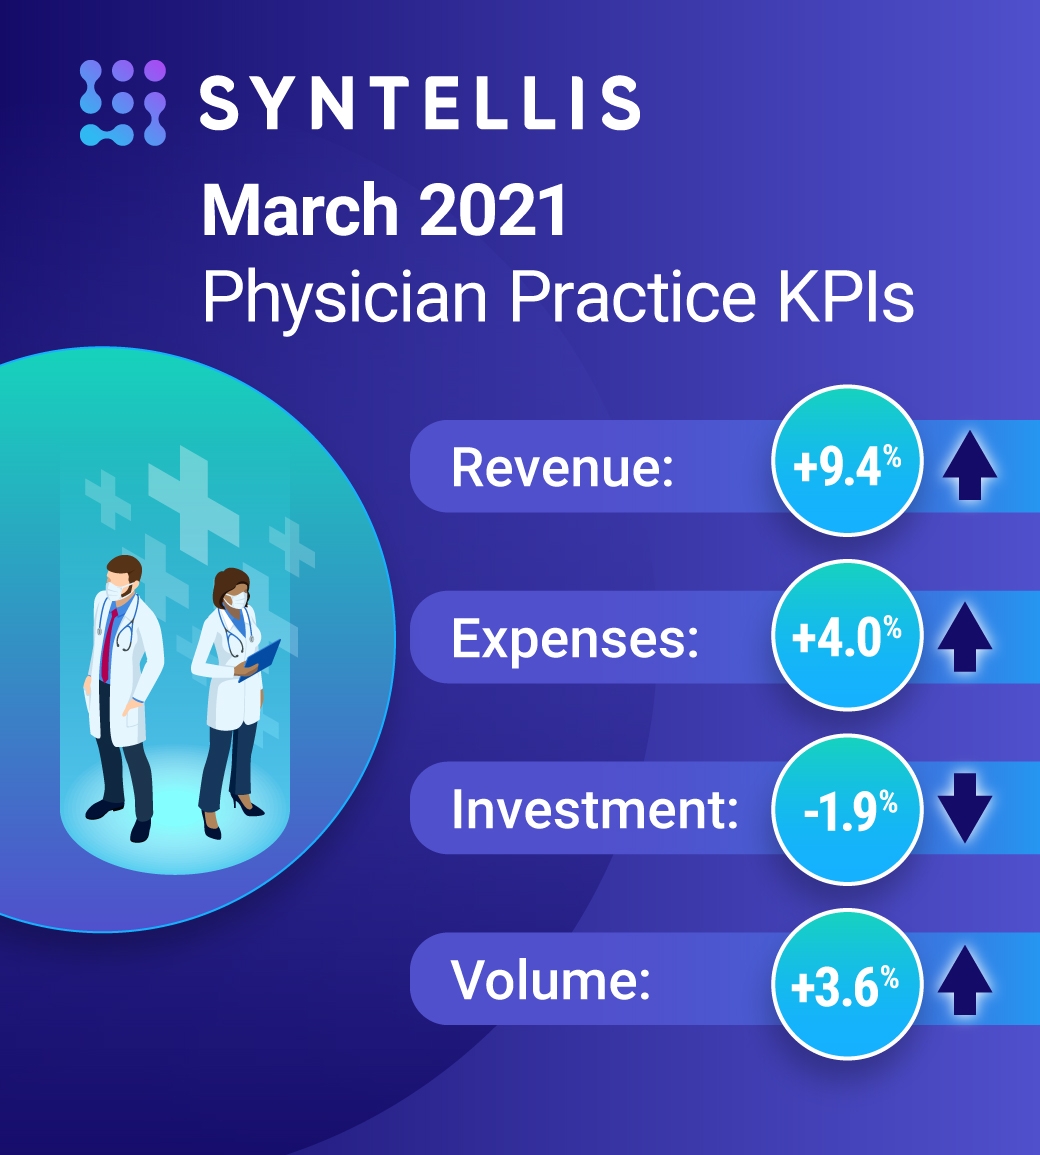 March 2021 Physician Practice KPIs from Syntellis' Axiom Comparative Analytics